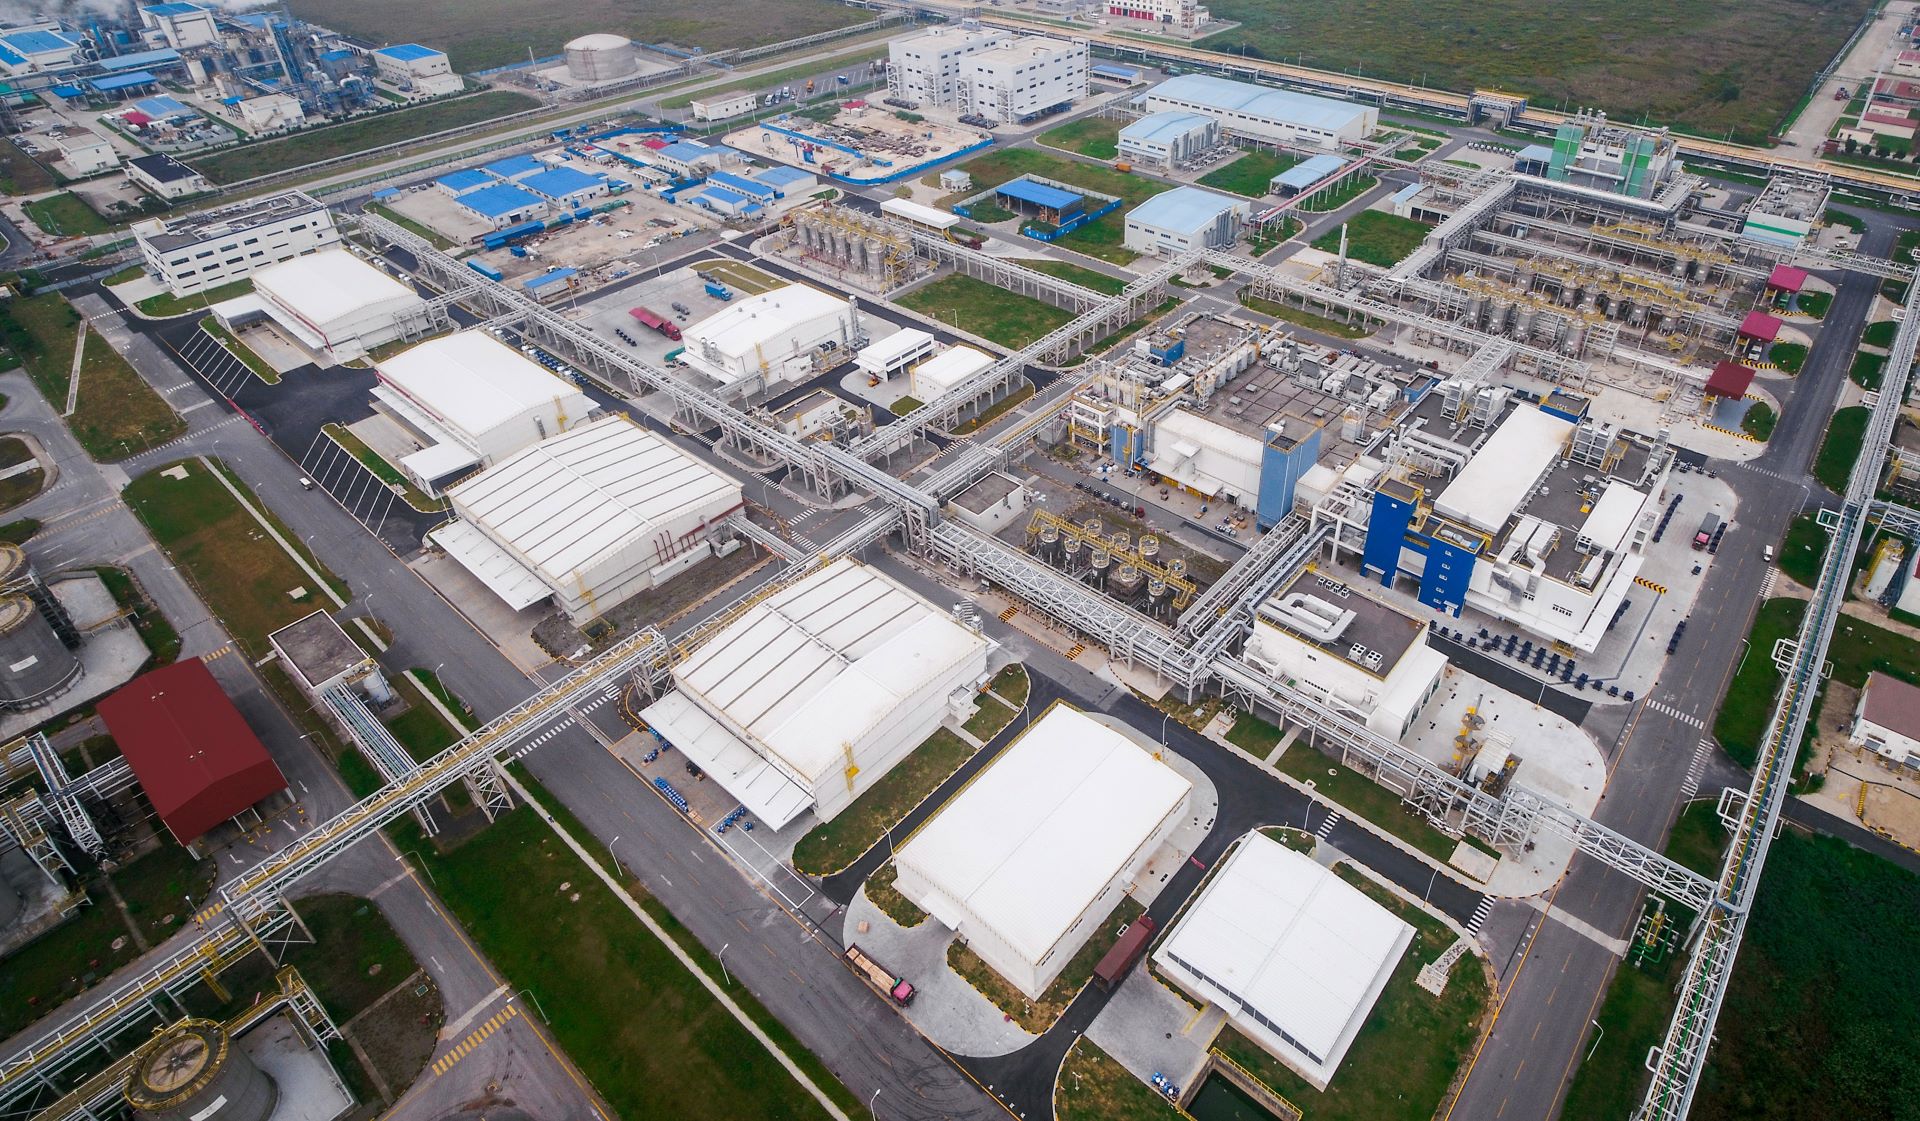 BASF’s Chinese operations announce 100 per cent renewable energy usage